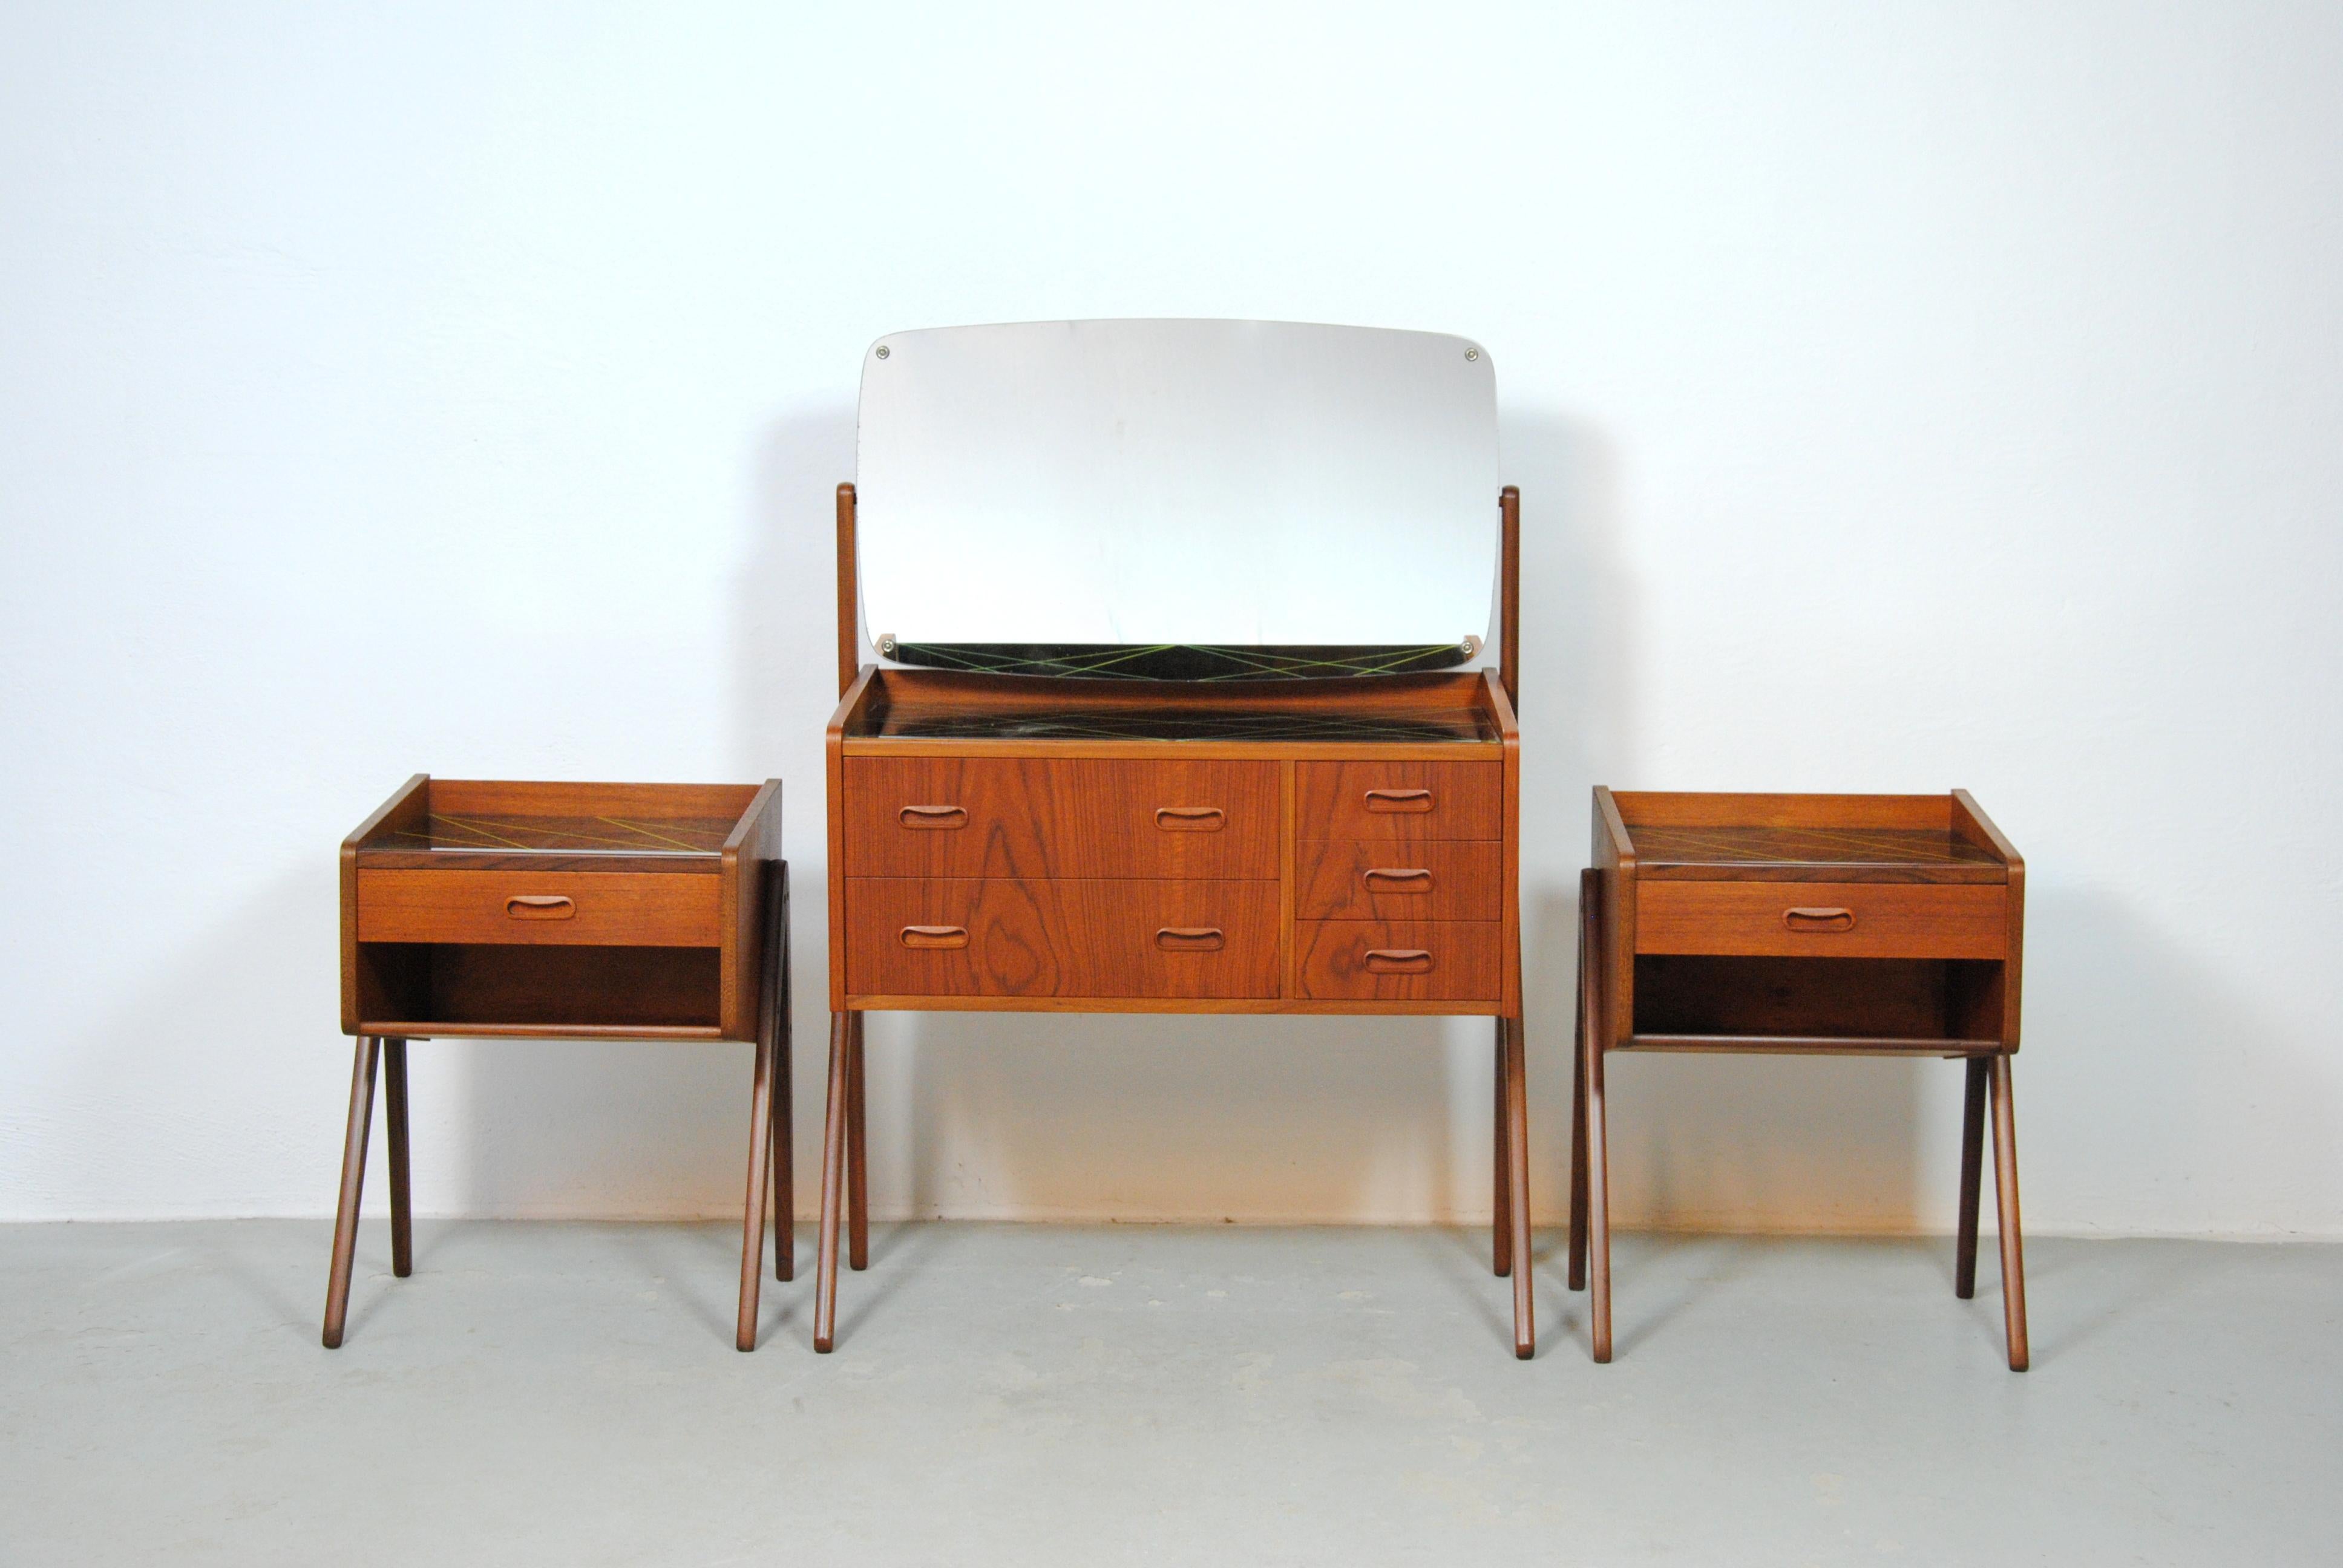 1960s teak vanity table and two nightstands with decorated glass tabletops

The rarely seen set feature a fully restored teak vanity table with a large adjustable mirror, a black glass table top decorated with colored patterns, 5 spacious drawers